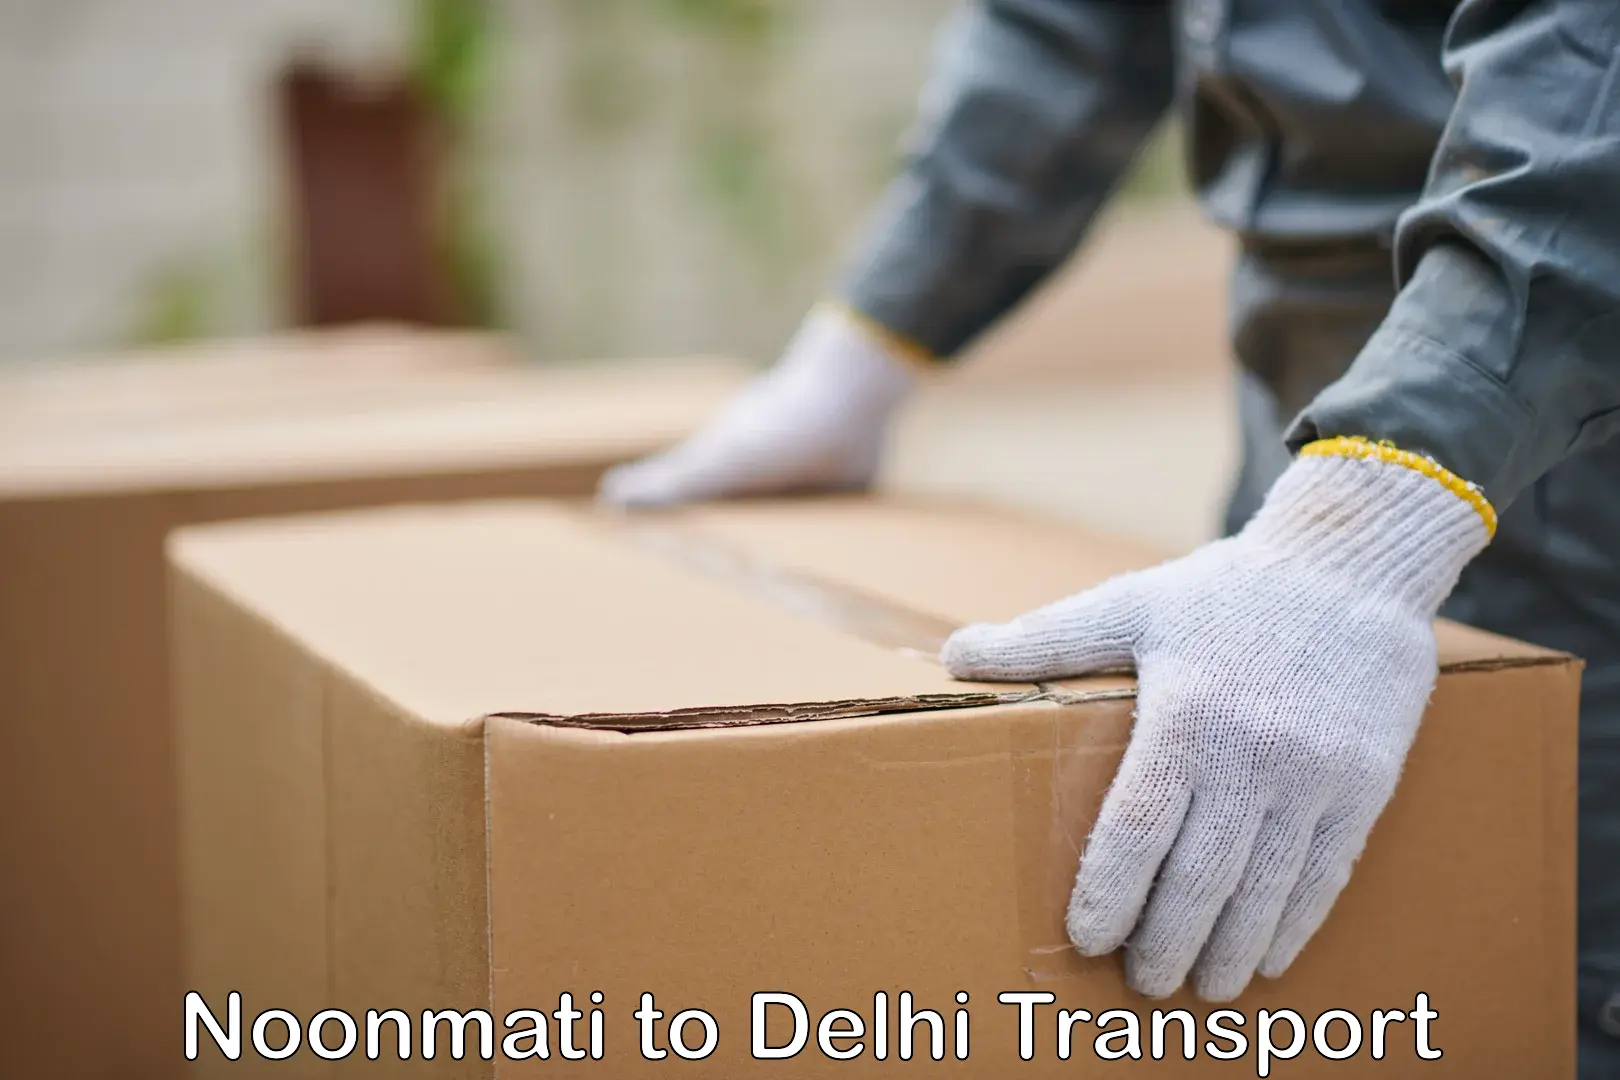 Daily transport service Noonmati to Delhi